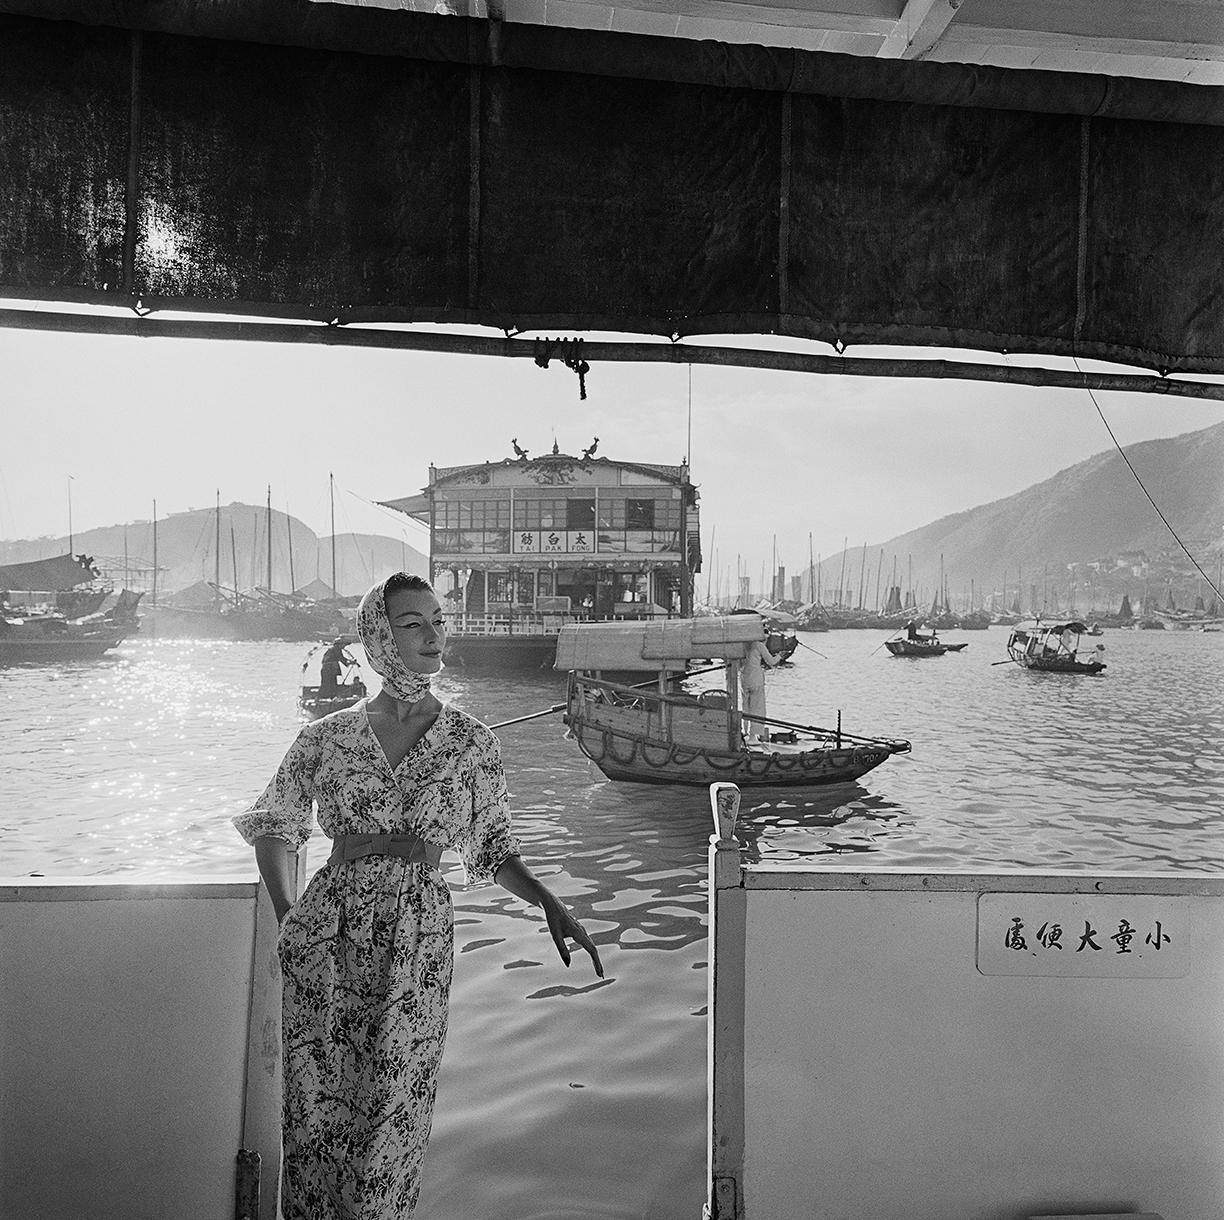 Selected from the Derujinsky: Around The World Portfolio, shot in Hong Kong for Harper's Bazaar

Artist: Gleb Derujinsky

Title: Hong Kong Harbor

Year: 1957

Estate Edition: signed, stamped and numbered on verso. Signed by Andrea Derujinsky.